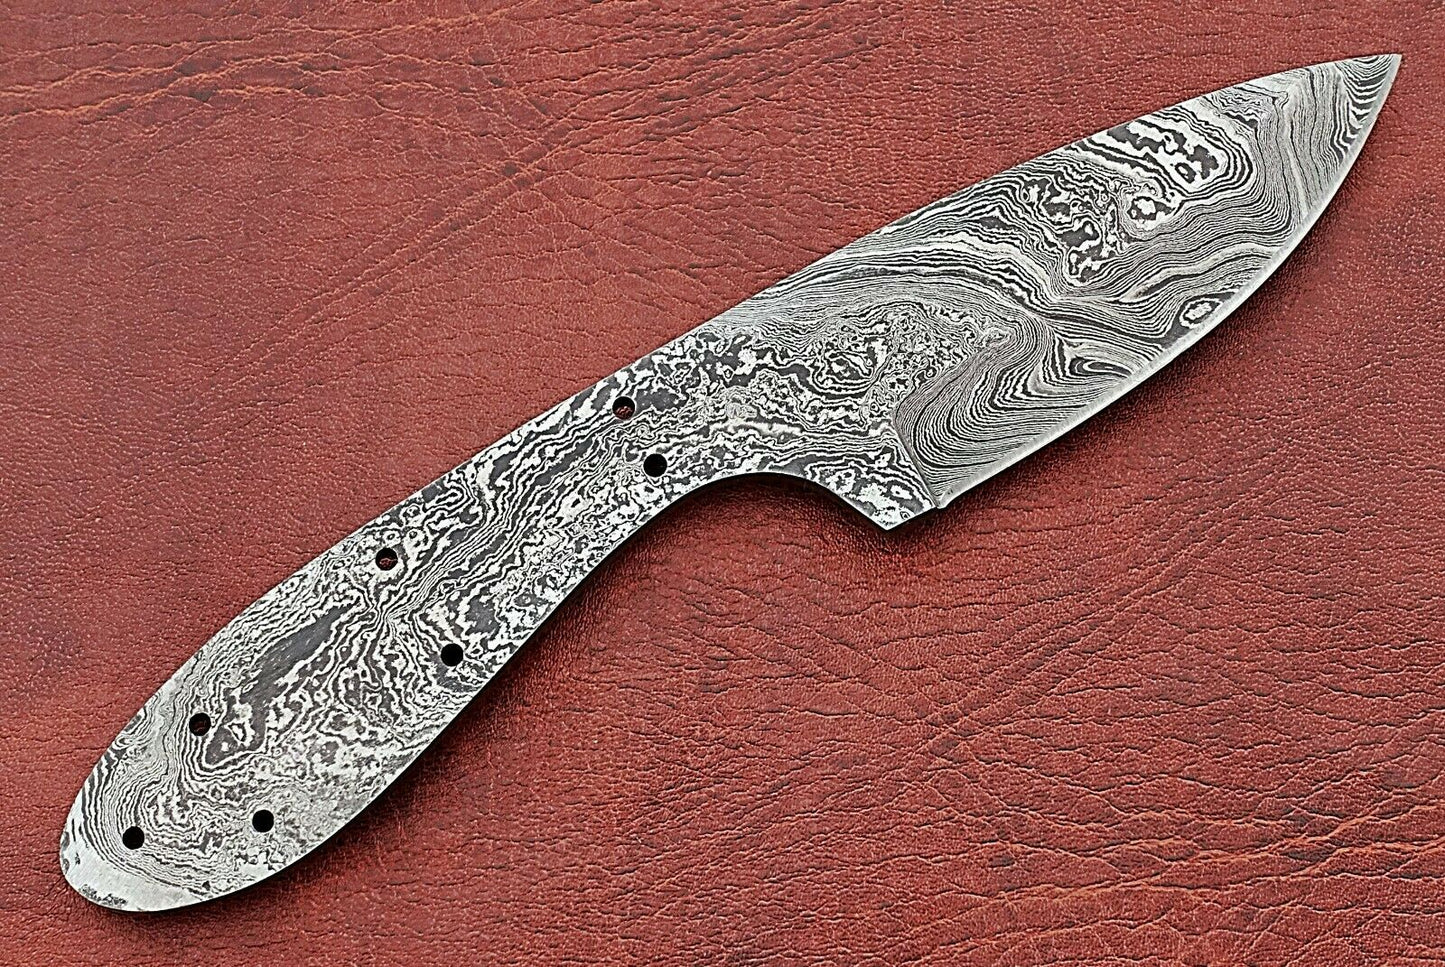 7.5" drop point Damascus steel blank blade pocket knife with 3" cutting edge